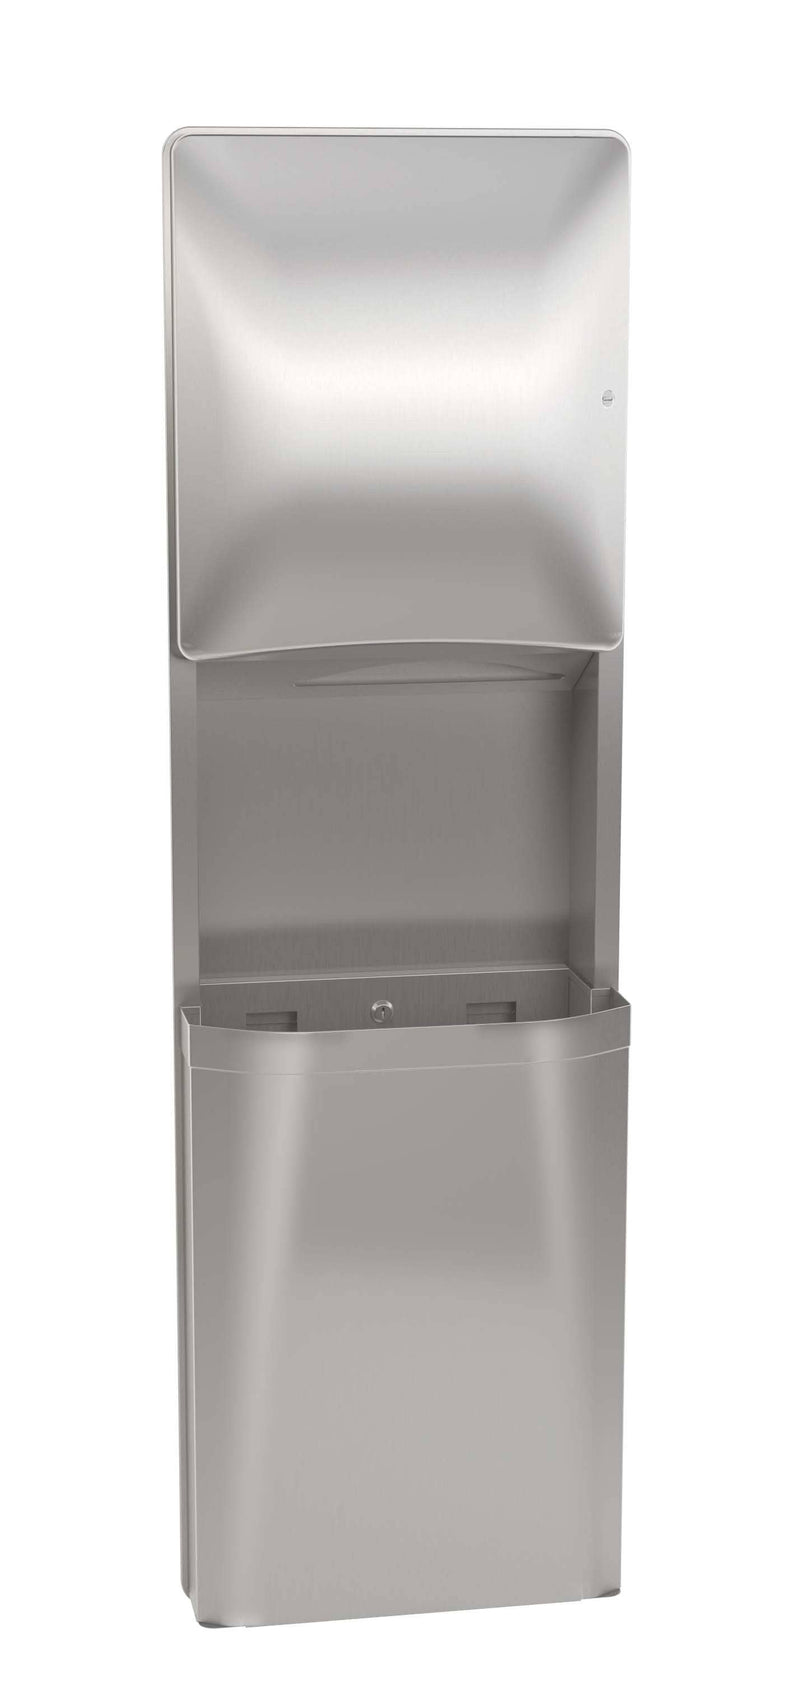 Bradley 2A95-1136 Combination Toilet Paper Dispenser/Waste Receptacle, Semi-Recessed-Mounted, Stainless Steel - TotalRestroom.com